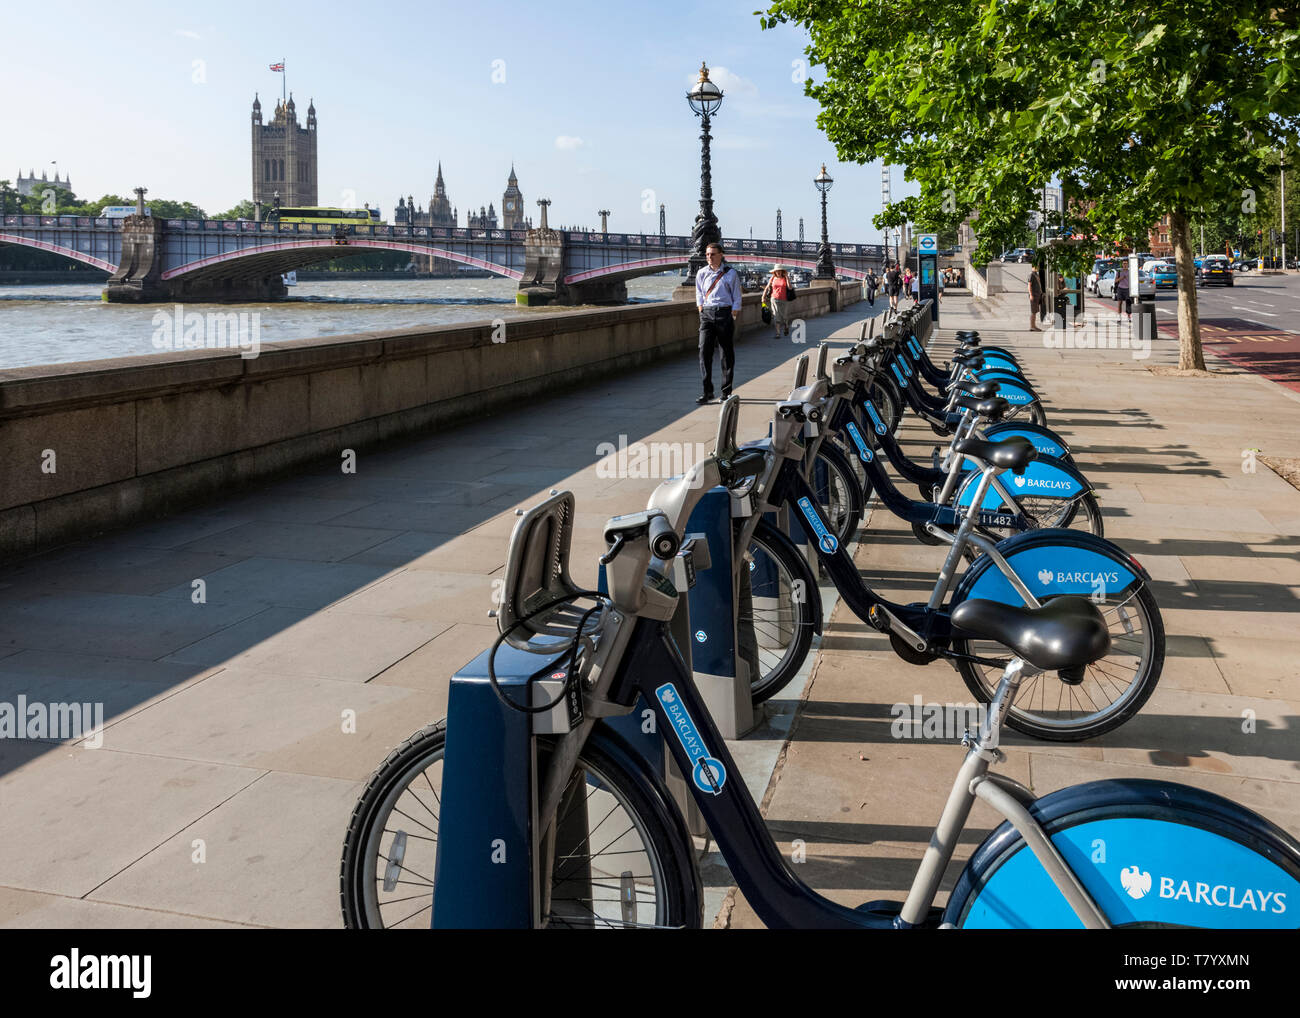 Barclays bikes also known as Boris bikes. Cycle hire scheme in London, England, UK Stock Photo